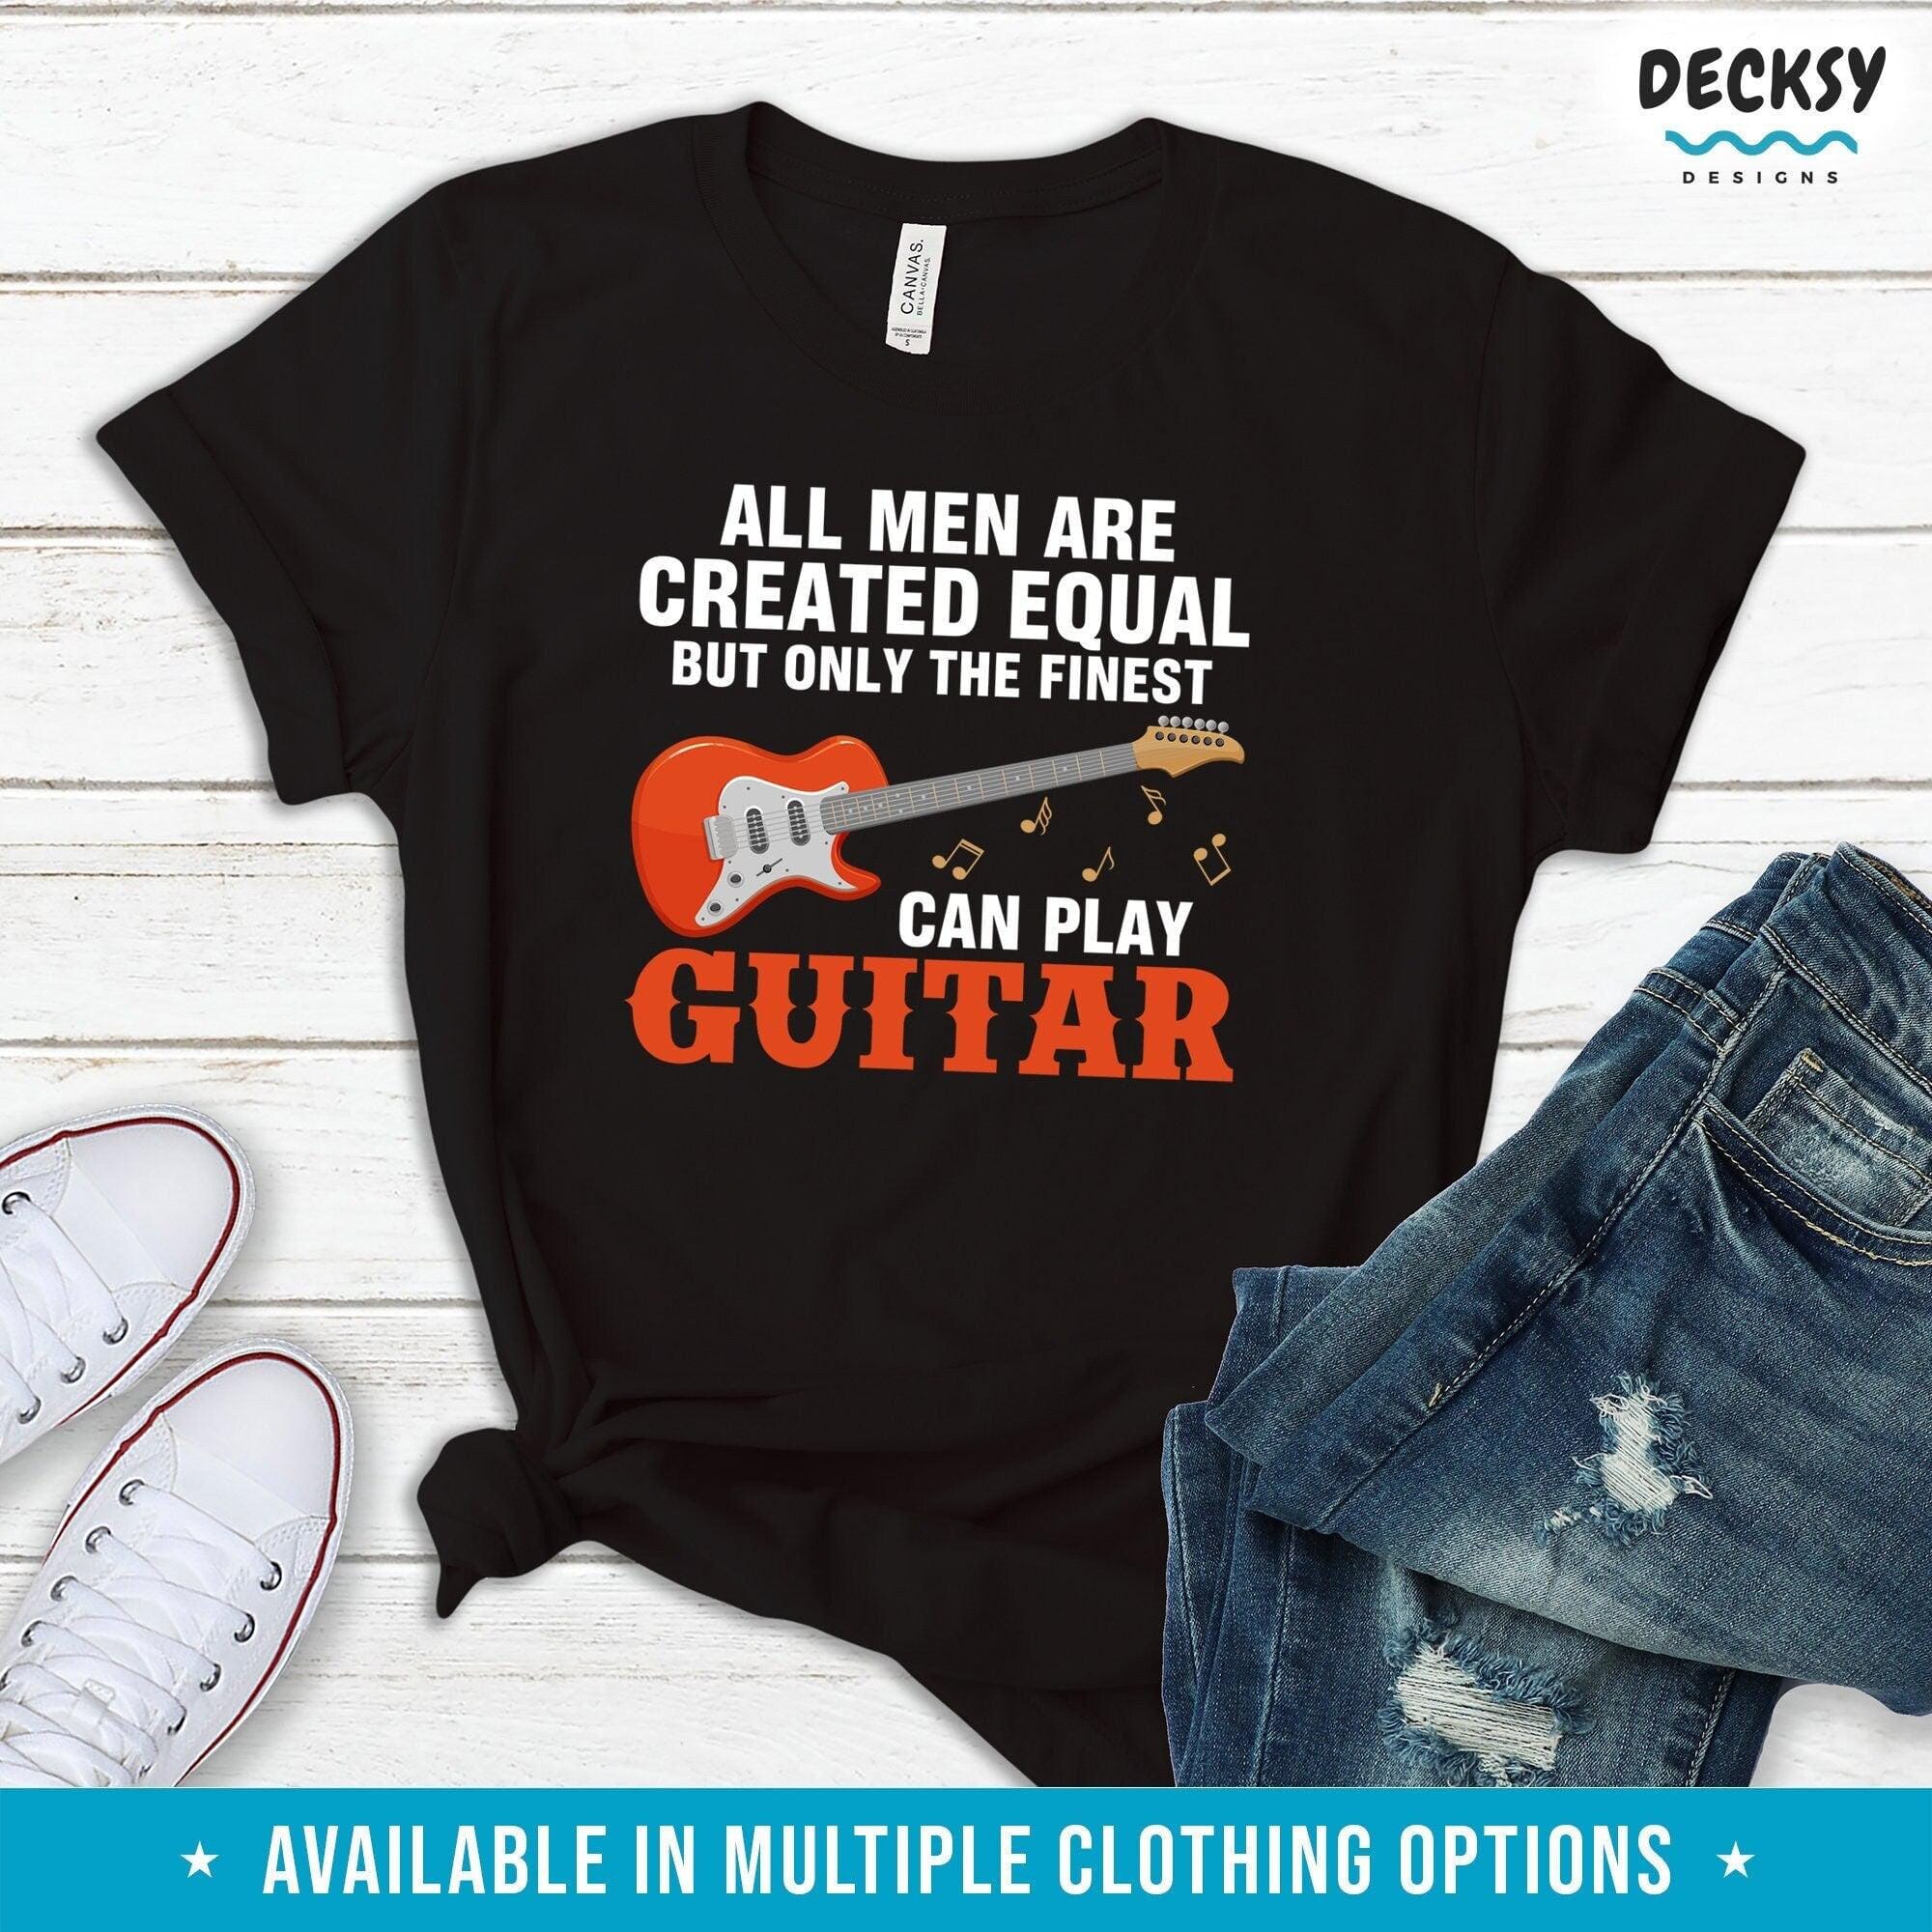 Guitarist Shirt, Guitar Gift For Men-Clothing:Gender-Neutral Adult Clothing:Tops & Tees:T-shirts:Graphic Tees-DecksyDesigns